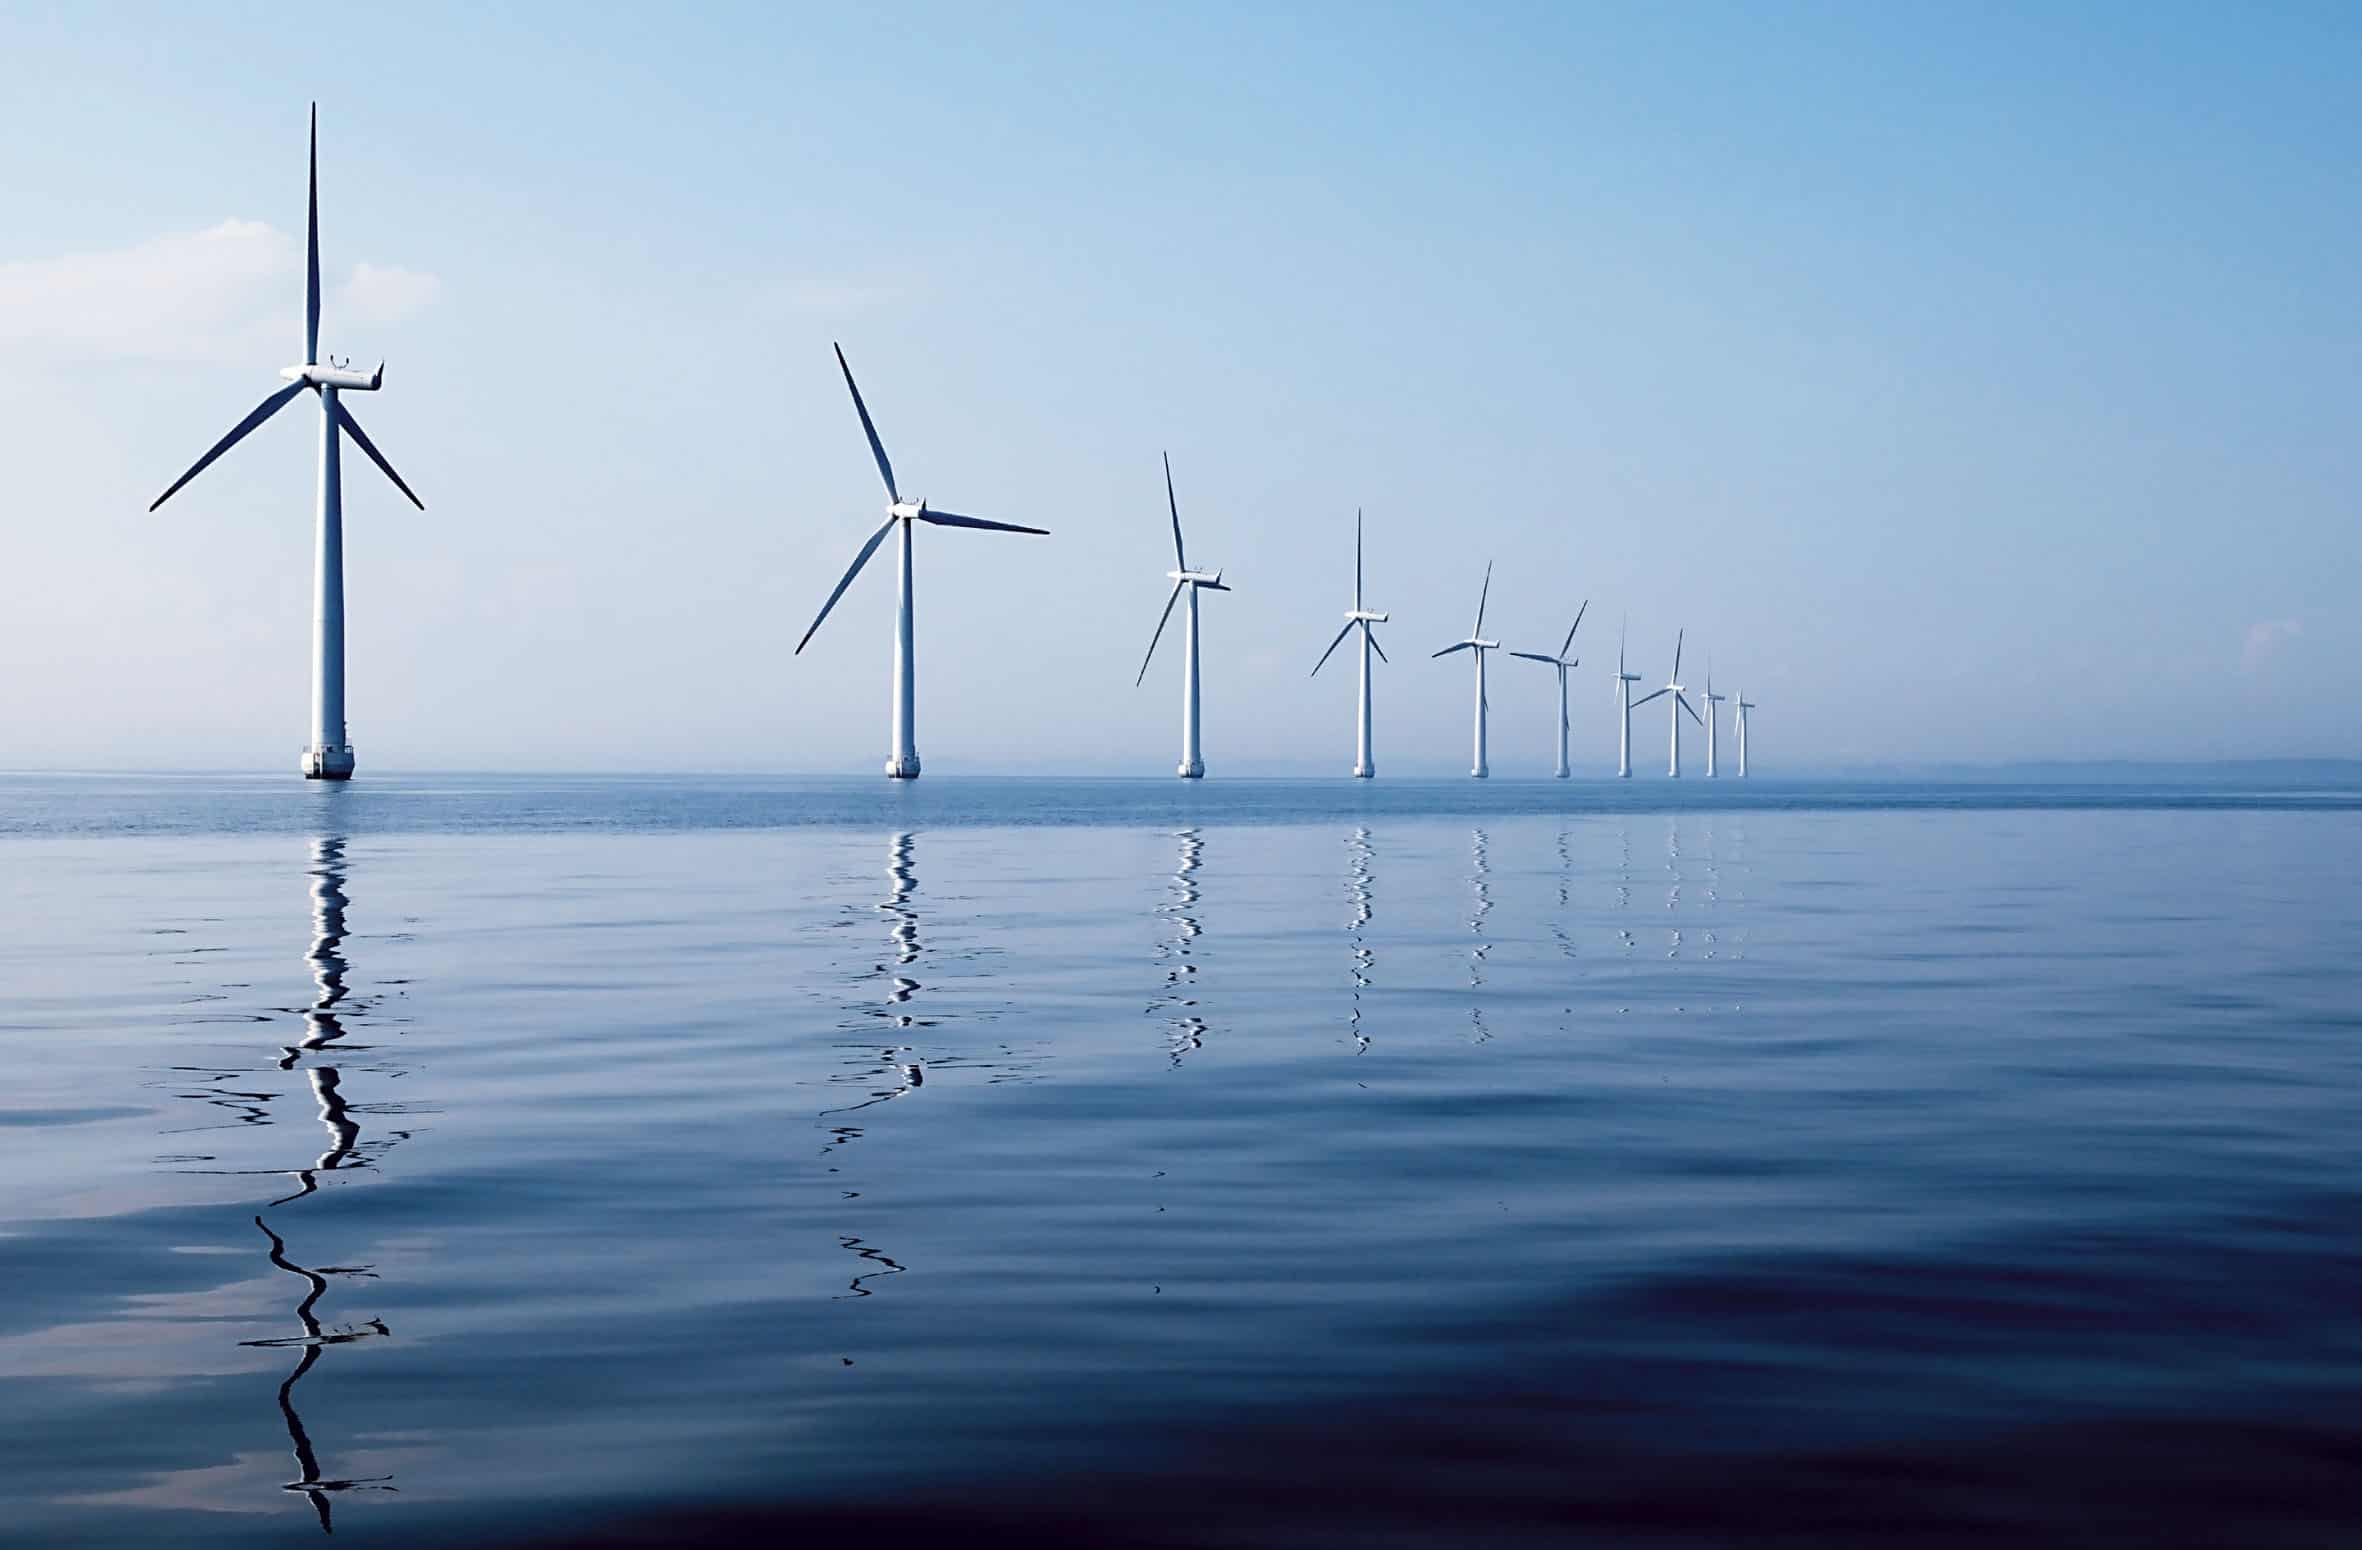 Background image of wind turbines on a calm sea.